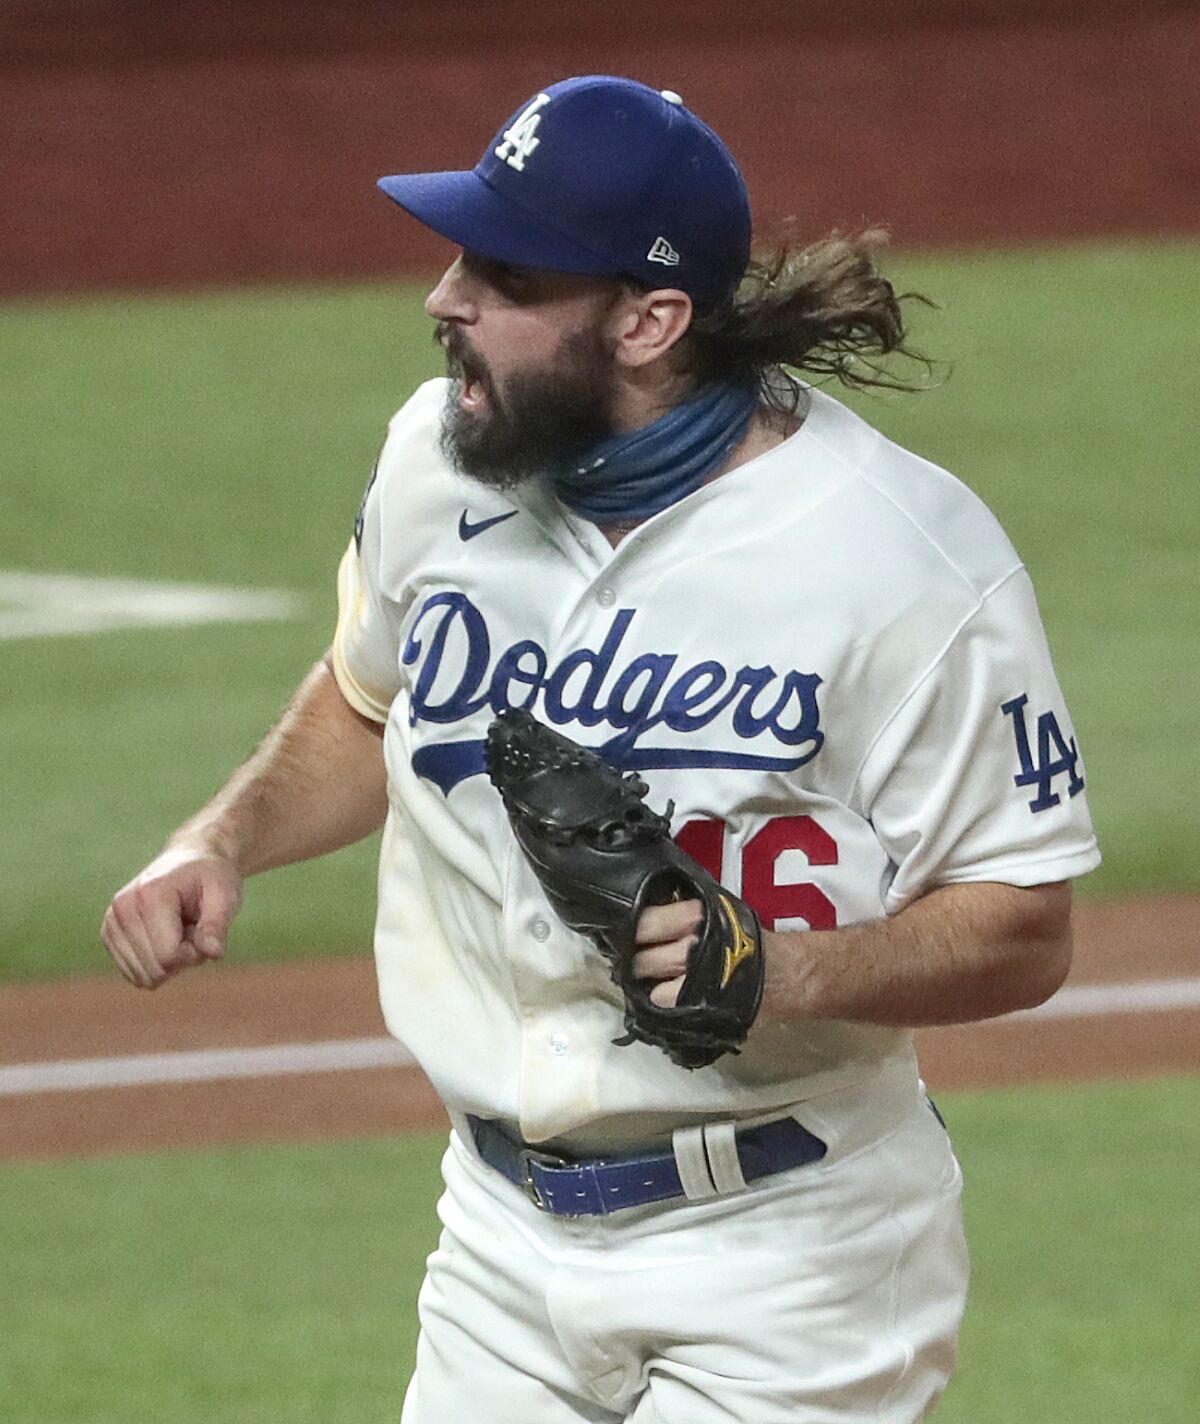 Dodgers starting pitcher Tony Gonsolin reacts after striking out Tampa Bay Rays third baseman Joey Wendle.